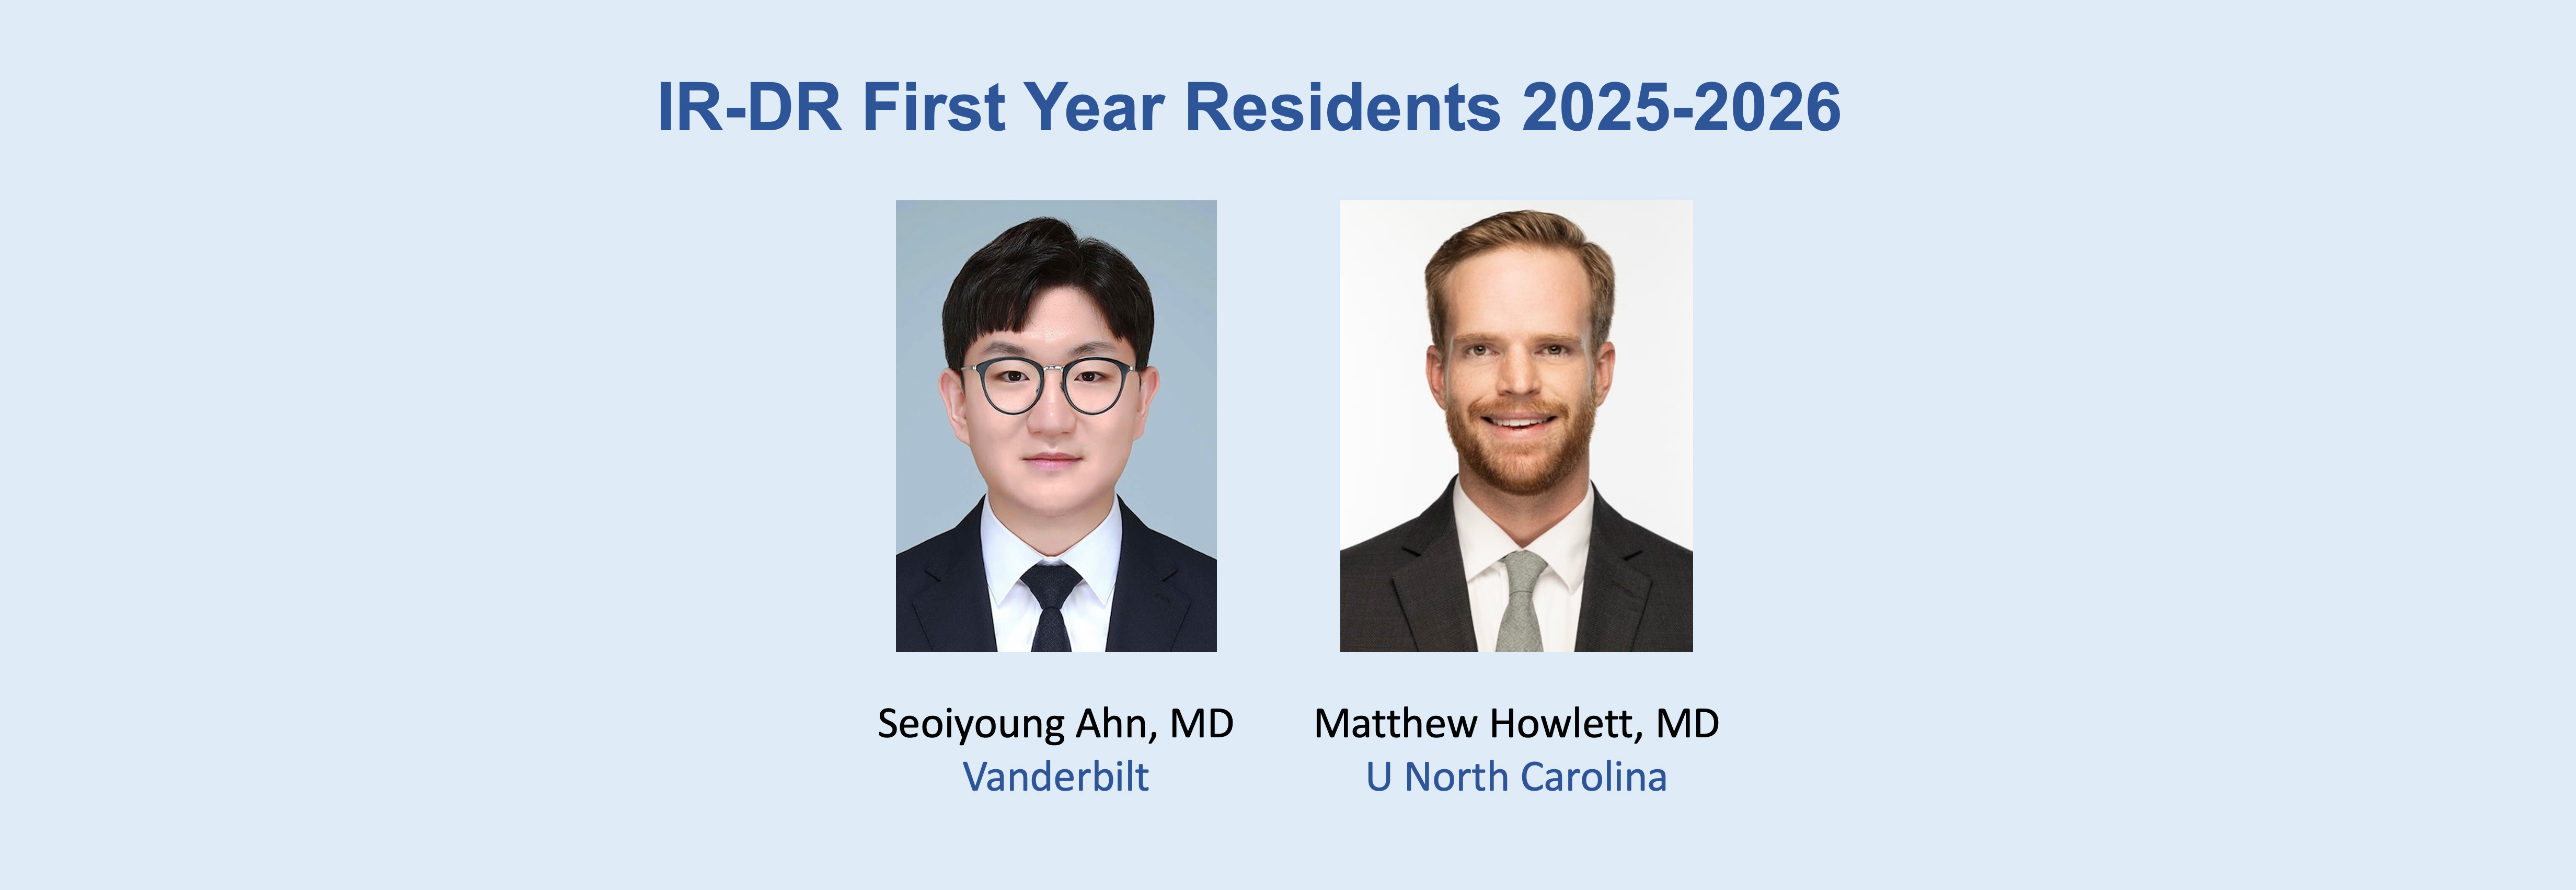 IR-DR First Year Residents 2025-2026